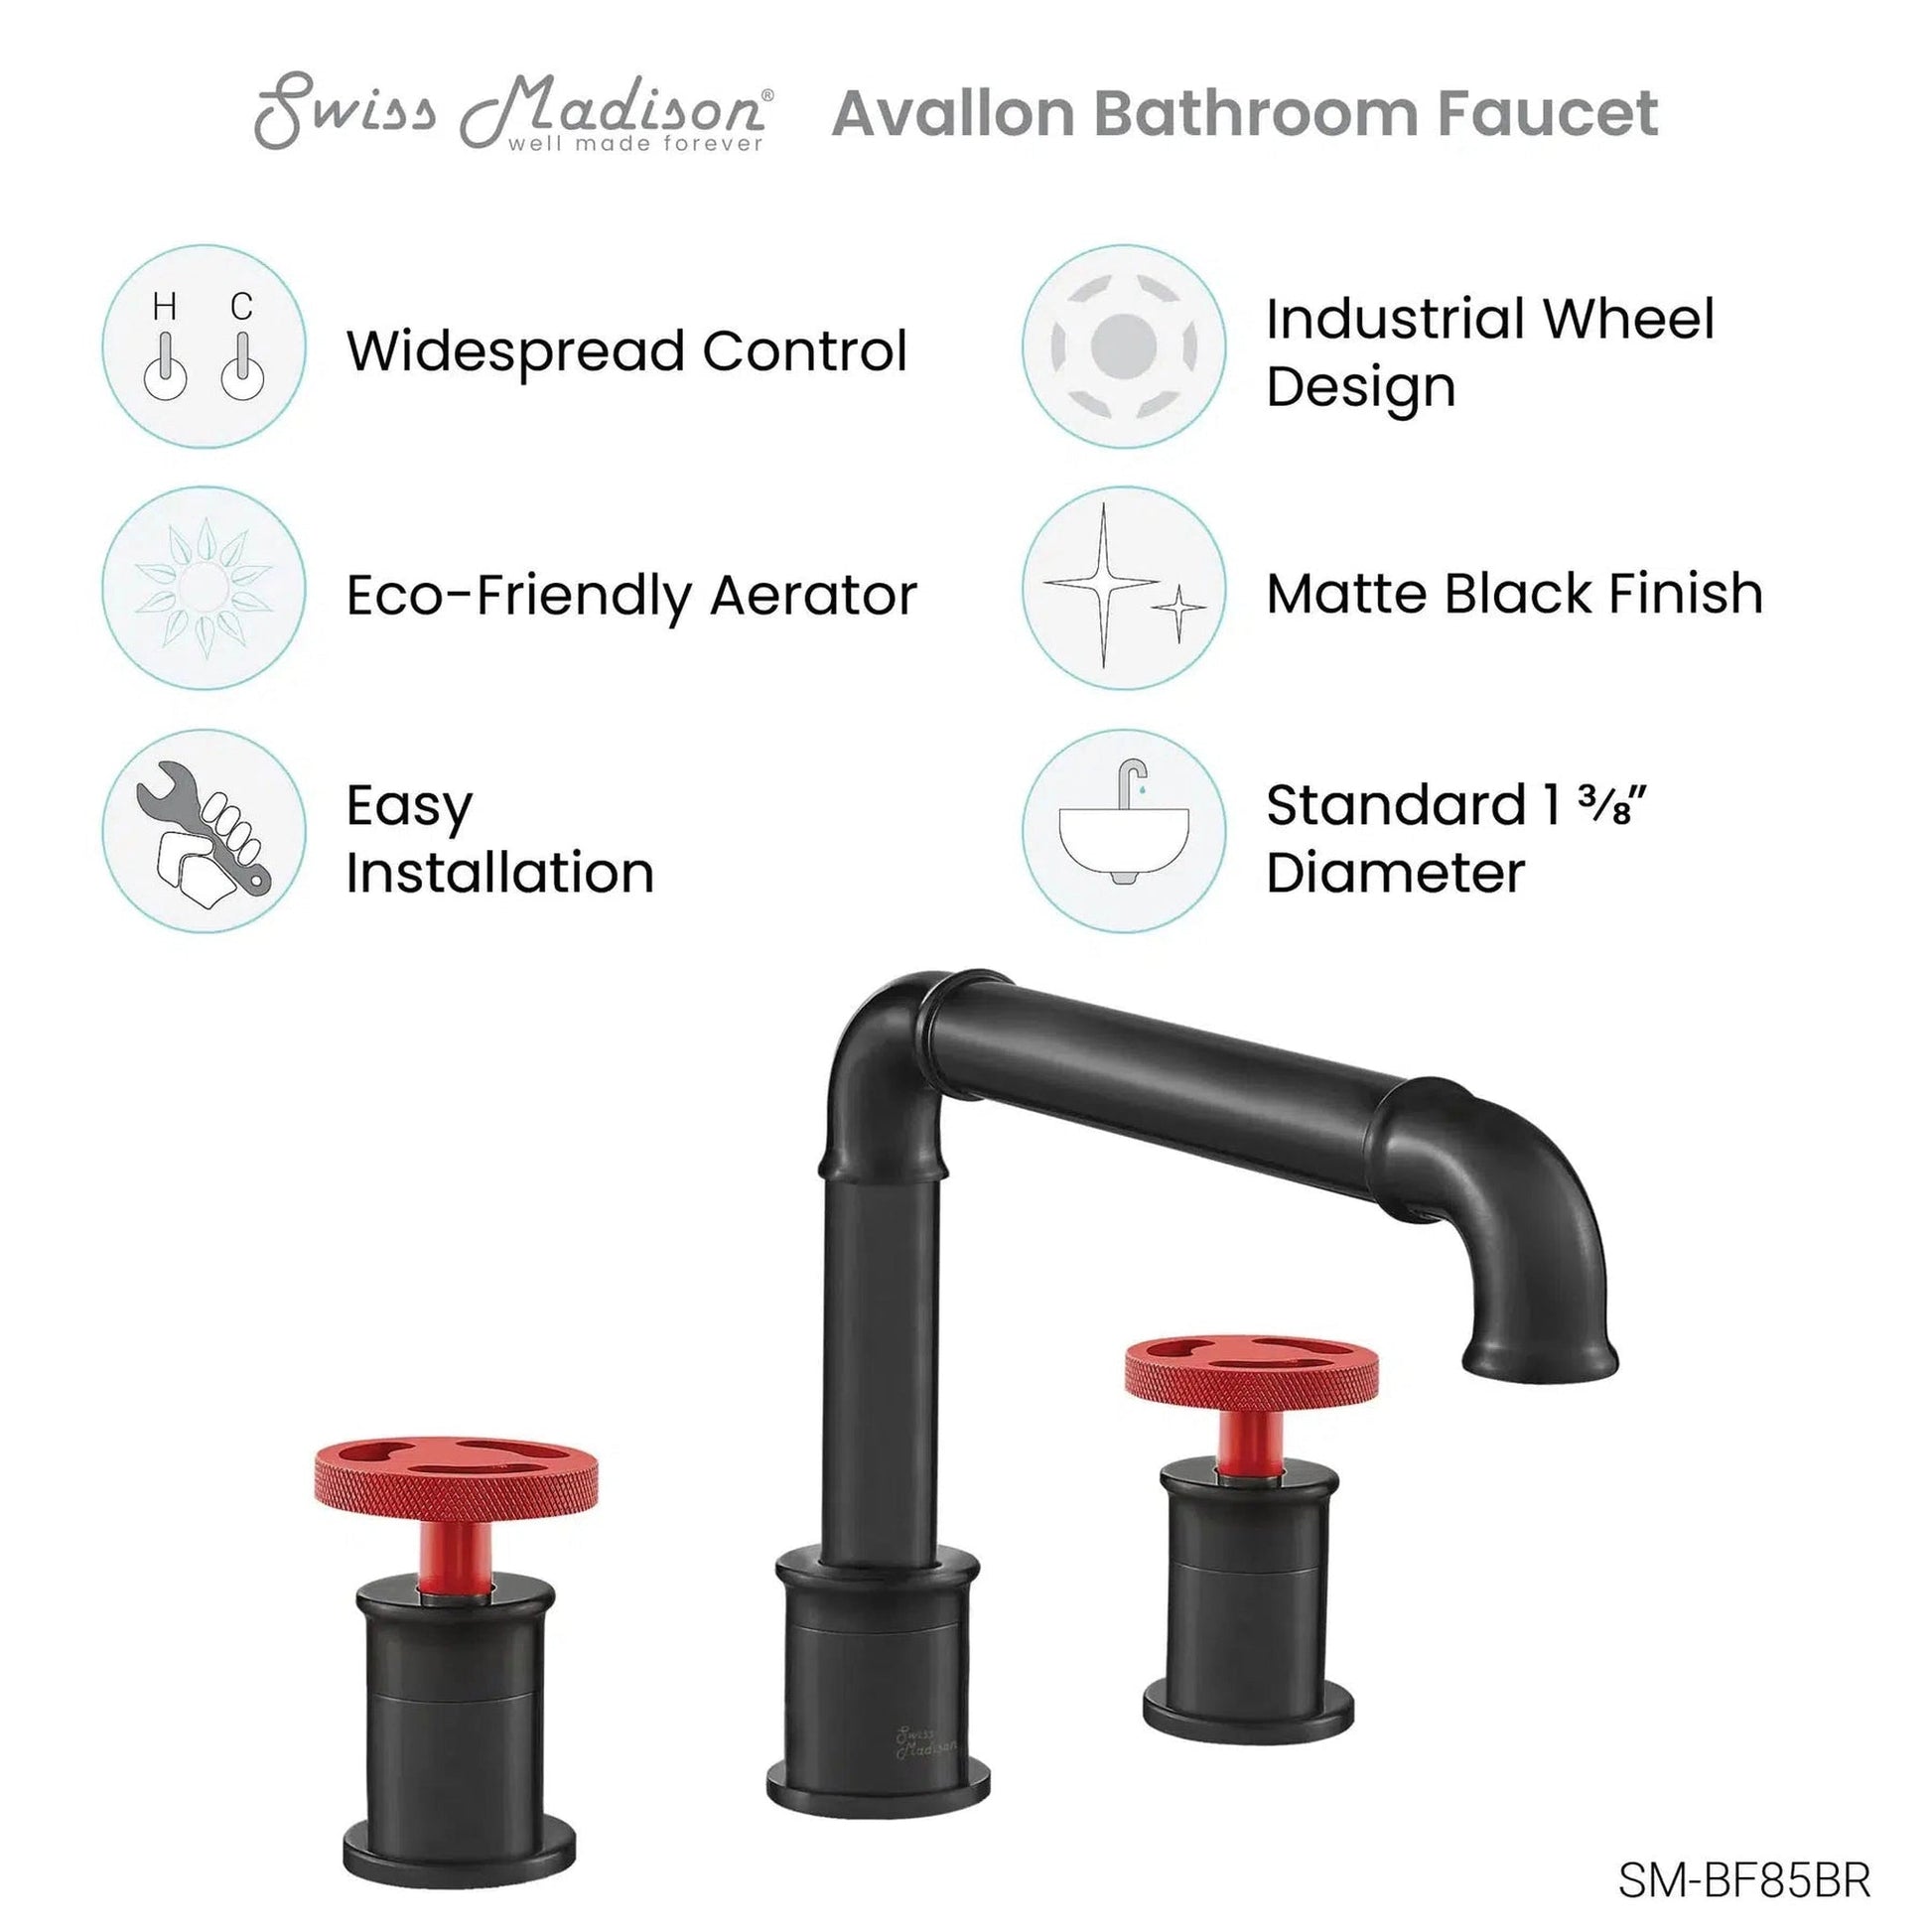 Swiss Madison Avallon 8" Widespread Matte Black Bathroom Faucet With Red Wheel Handle and 1.2 GPM Flow Rate